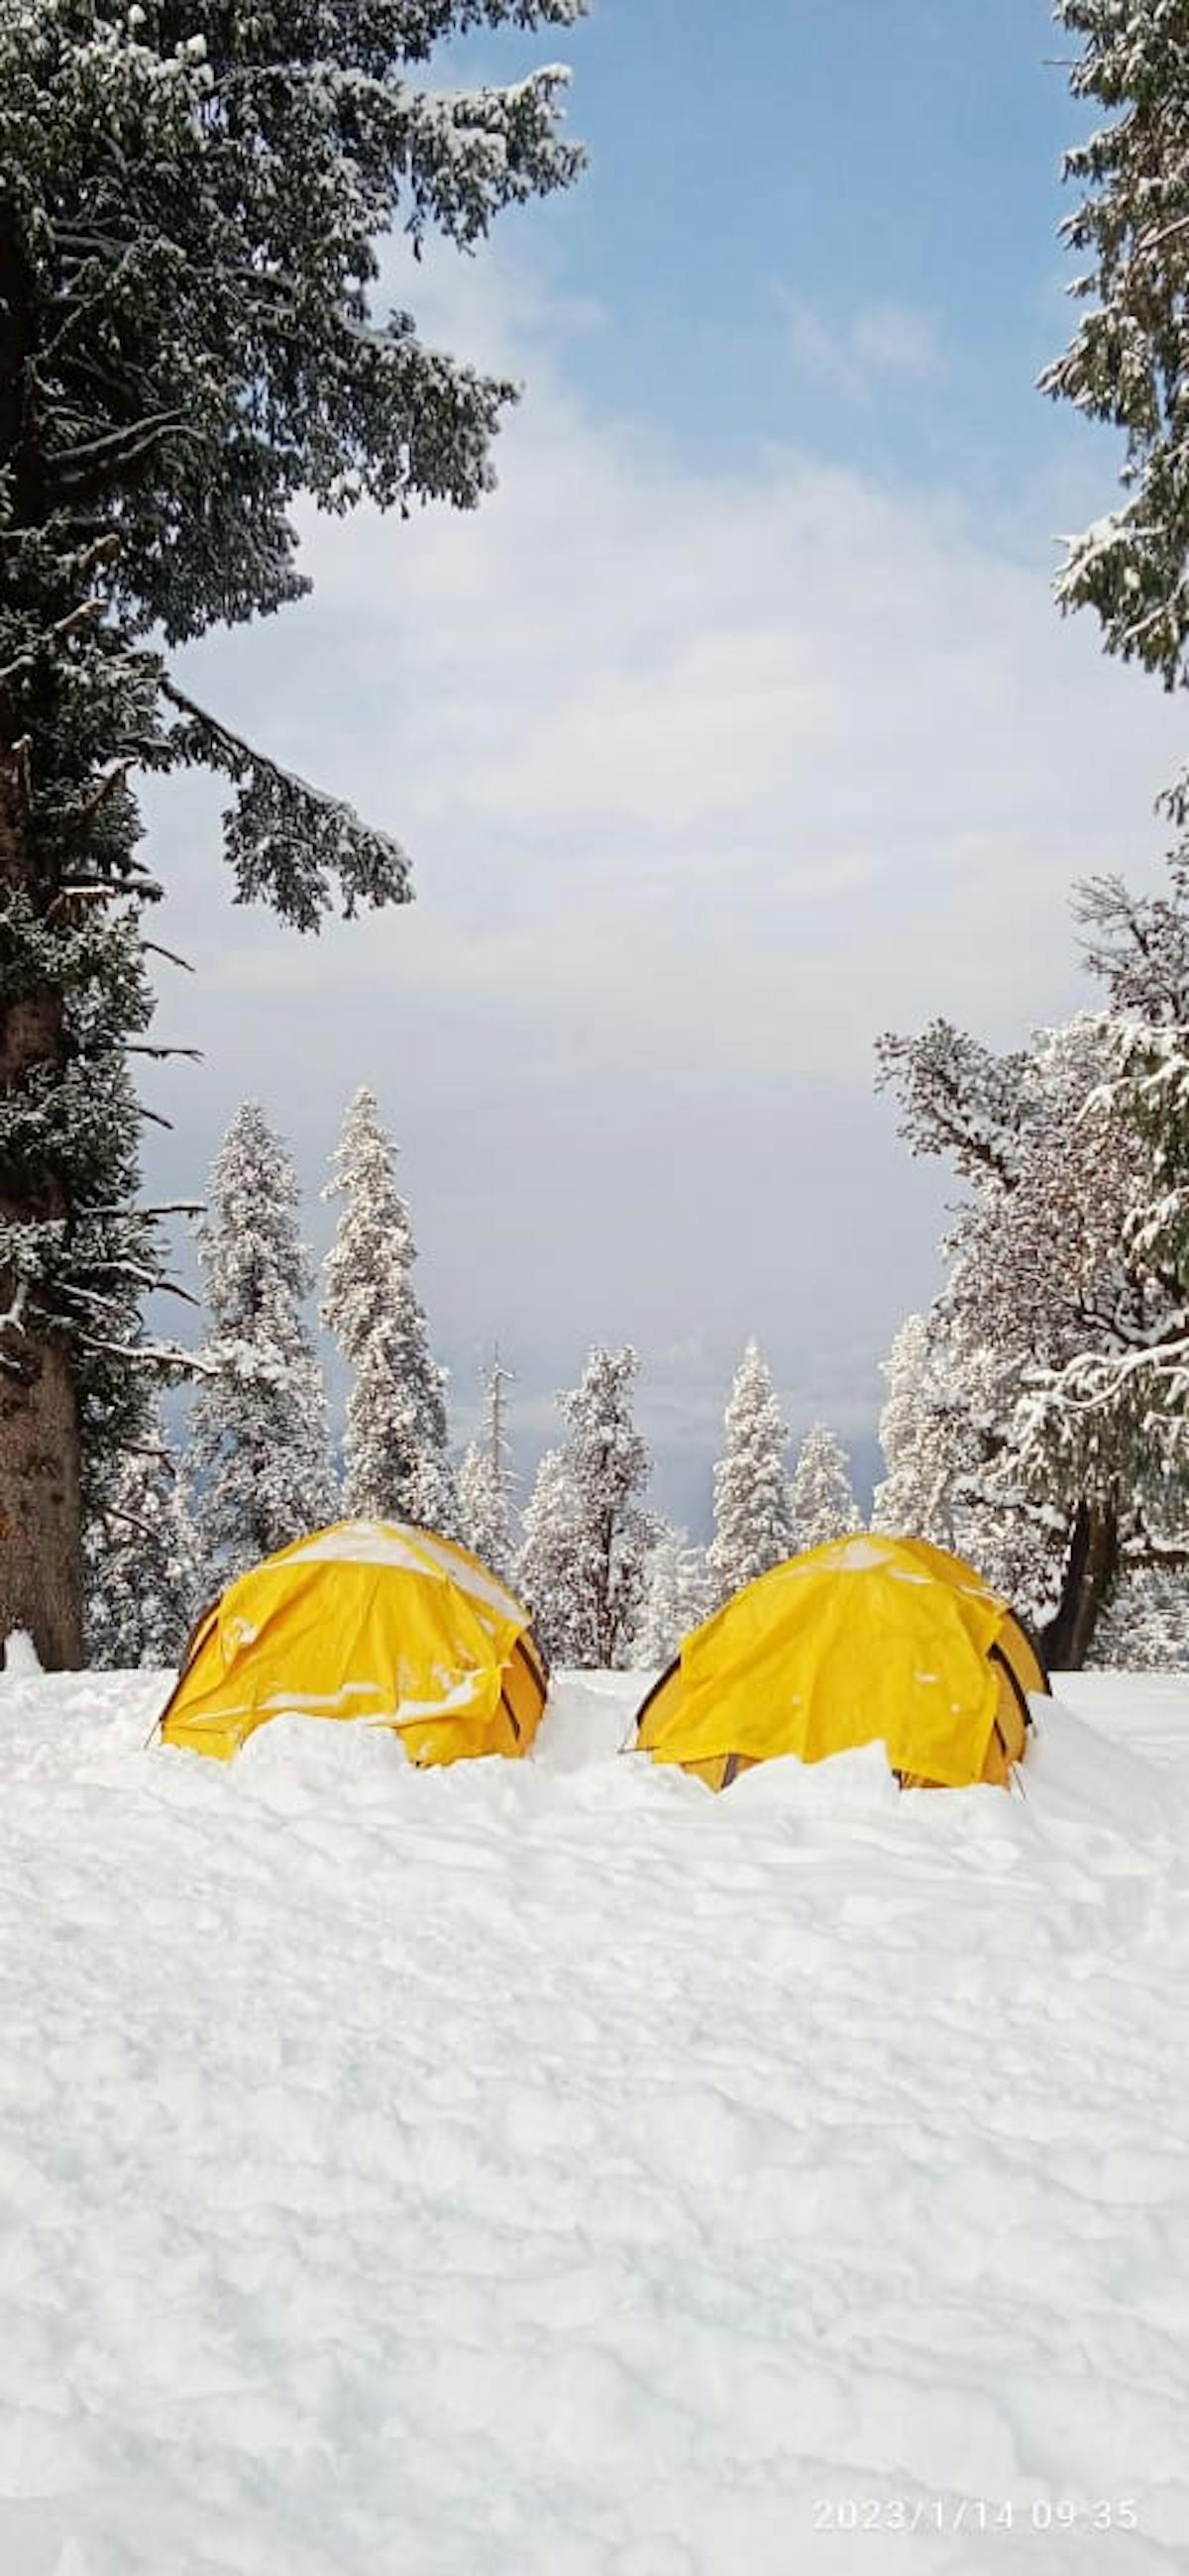 Kedarkantha campsite blanketed in snow. Photo by Varsha More.